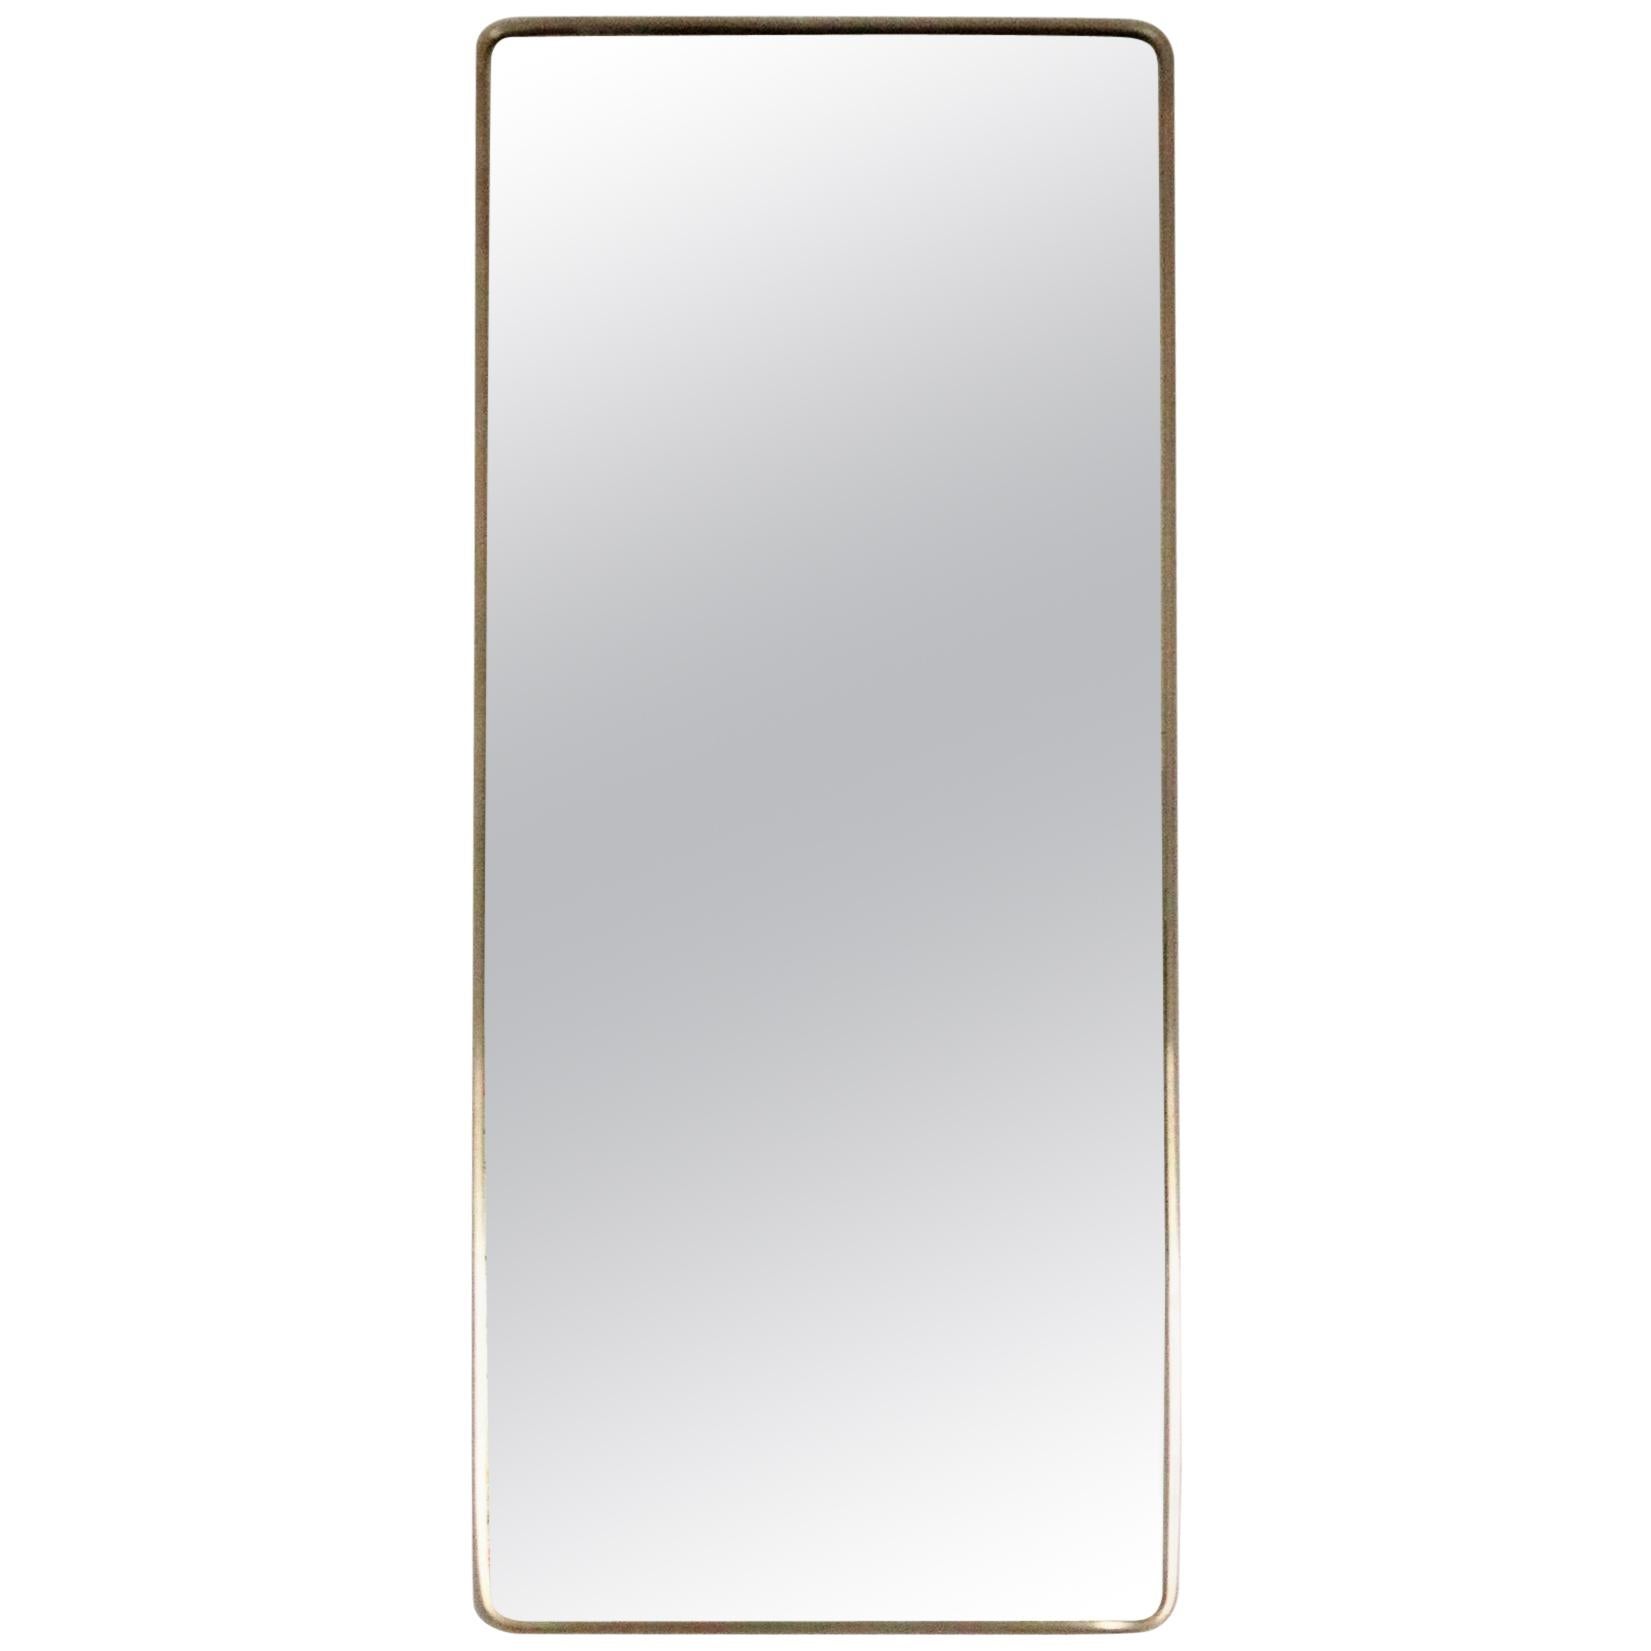 Italian Midcentury Vintage Wall Mirror with Original Brass Frame from the 1950s